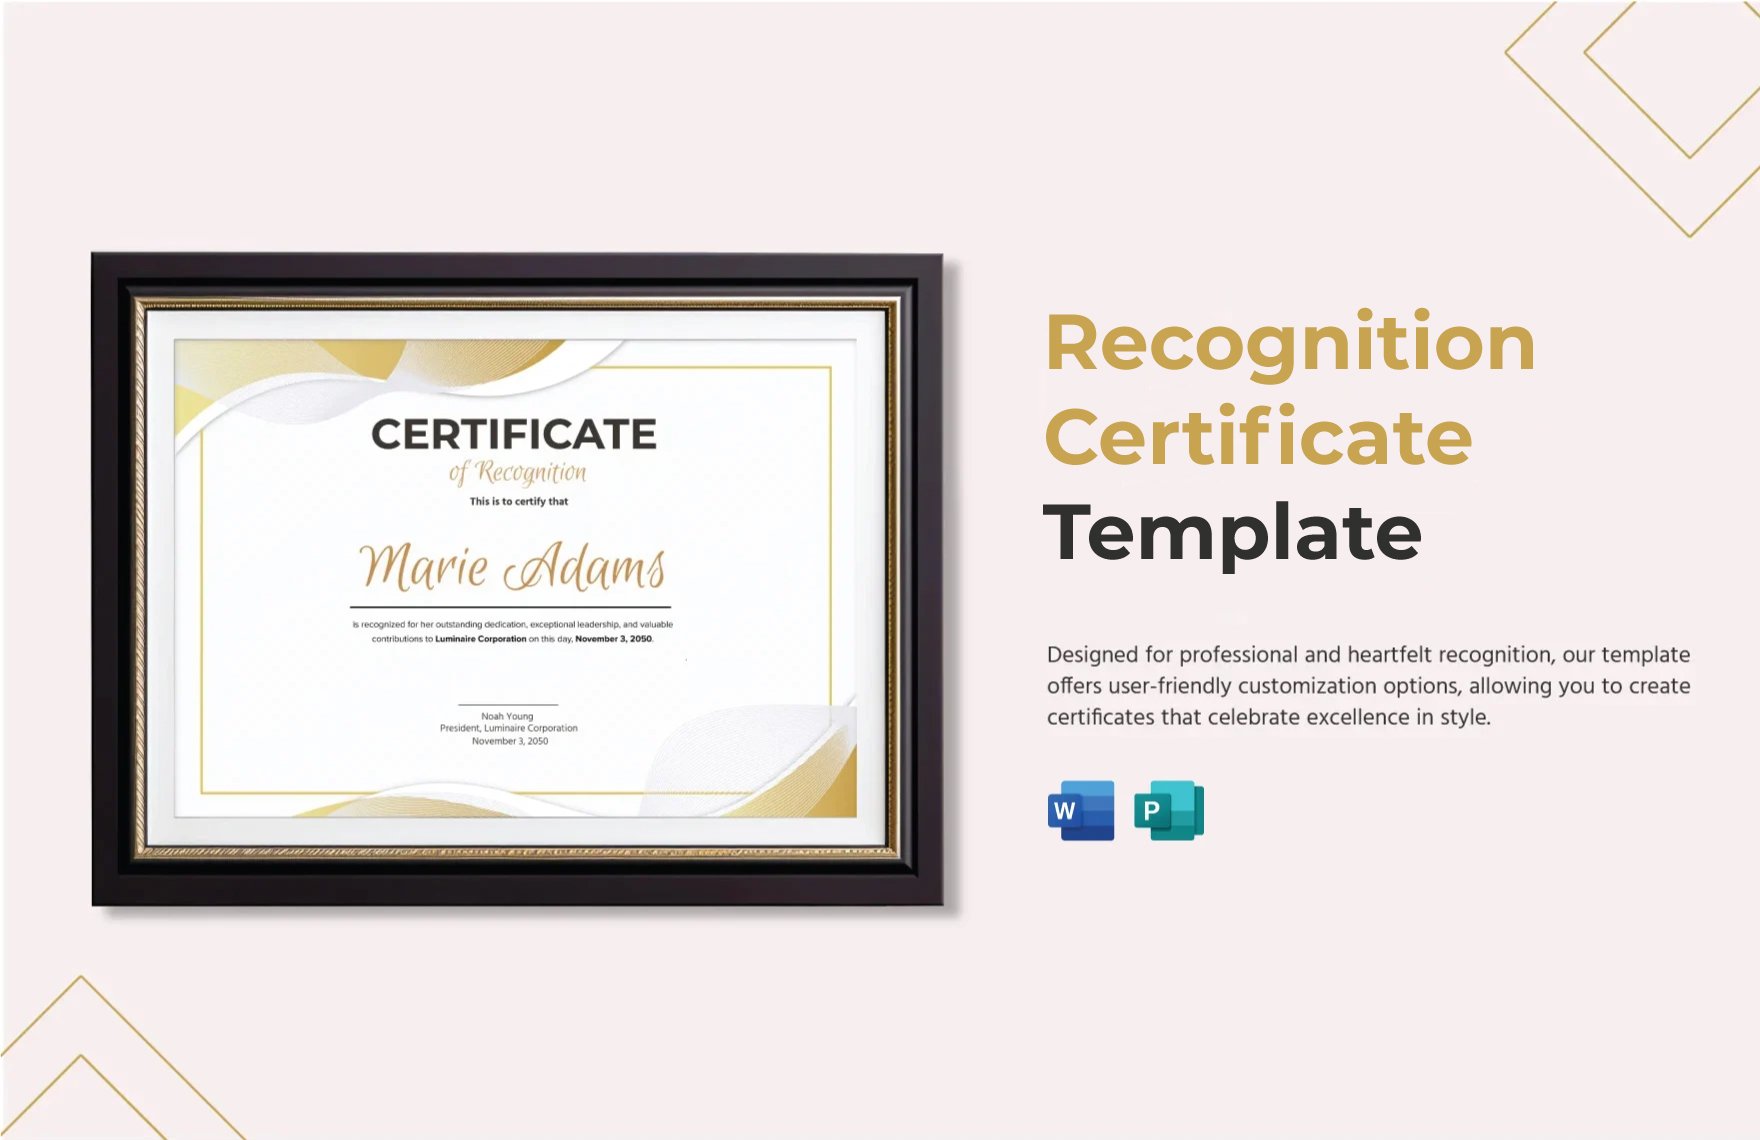 Free Recognition Certificate Template in Word, Publisher